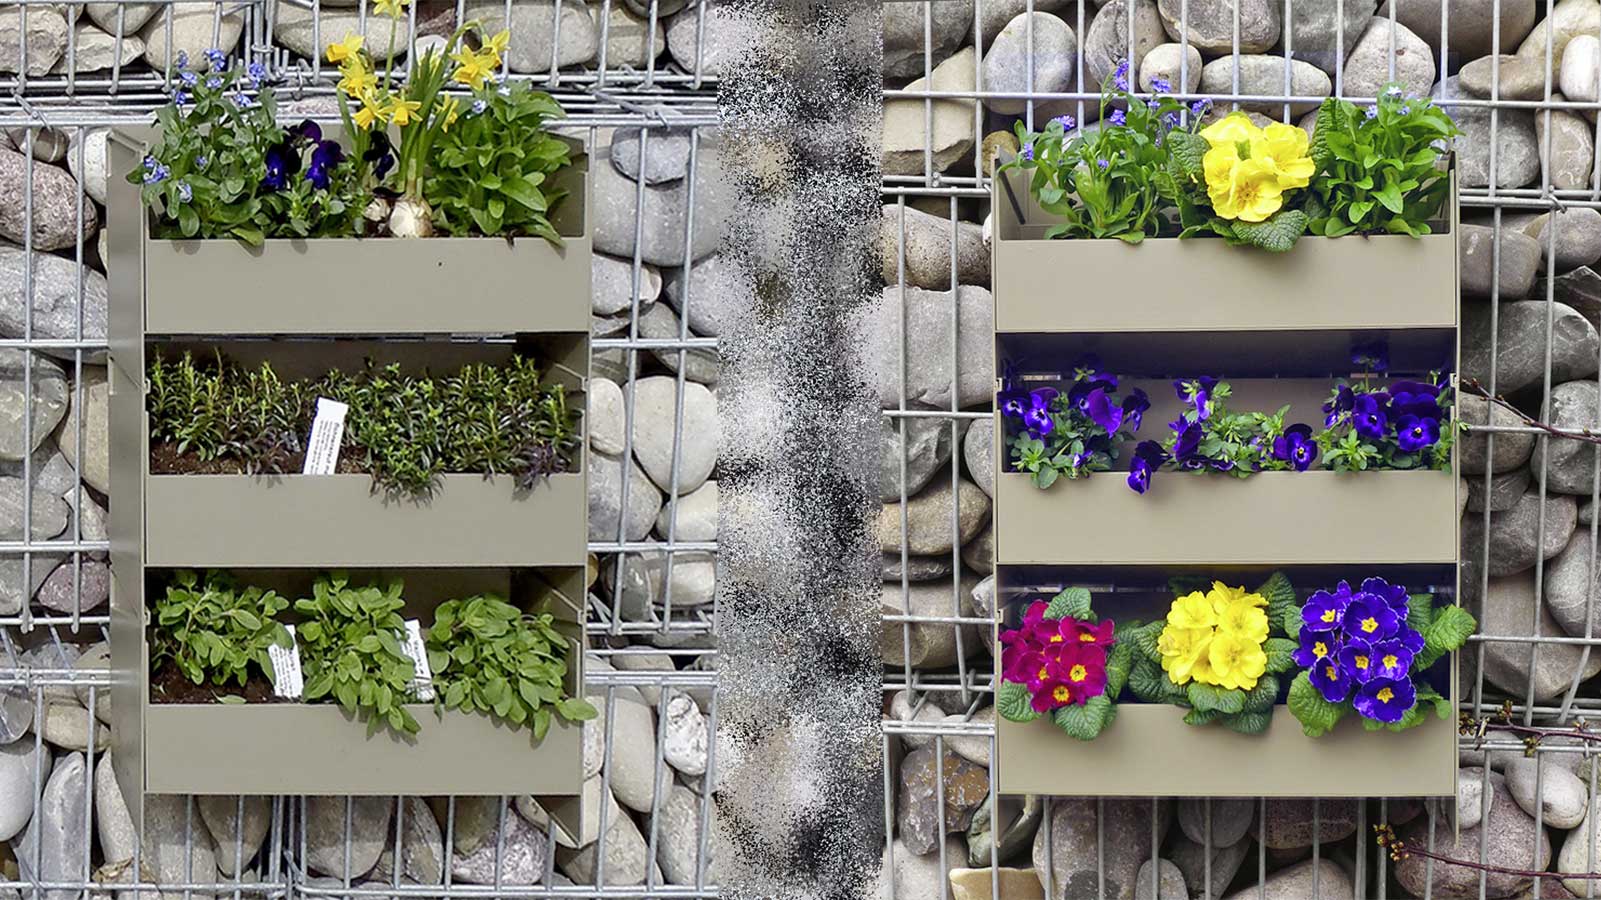 Stacking garden, the clever system for vertical planting by Stapelgarten